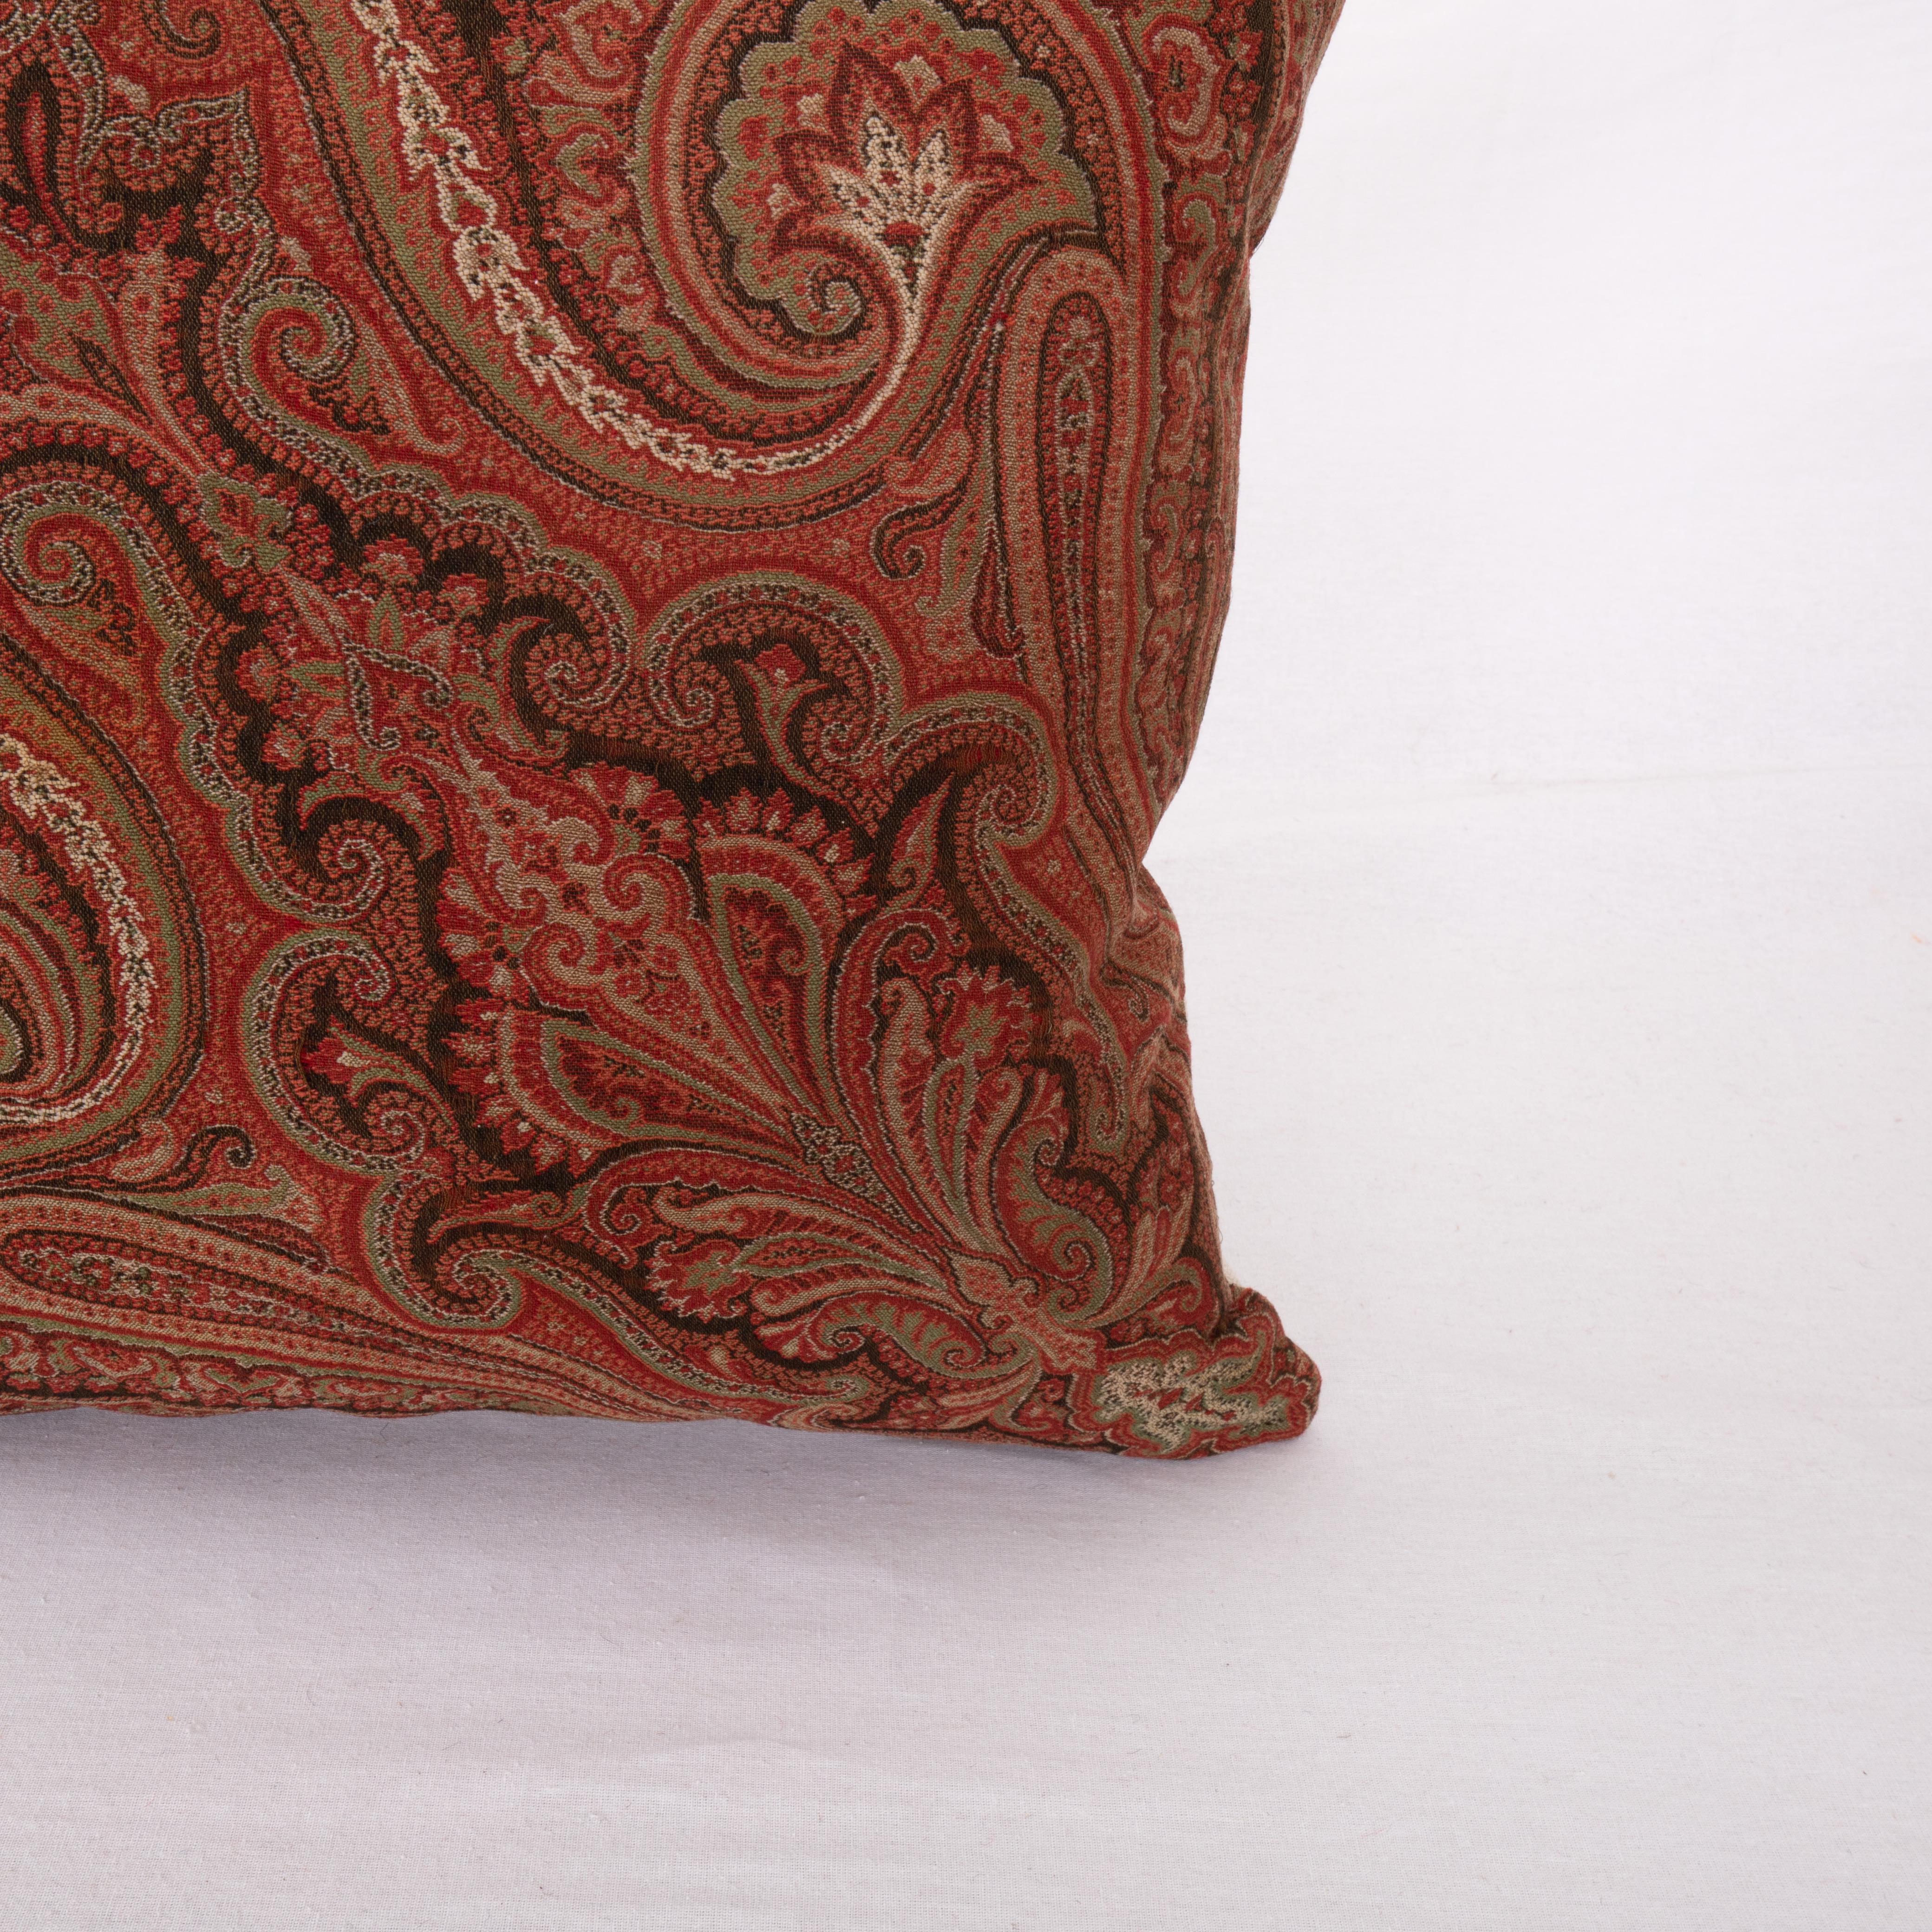 Woven Antique Pillow Cover Made from a European Wool Paisley Shawl, L 19th/ E. 20th For Sale